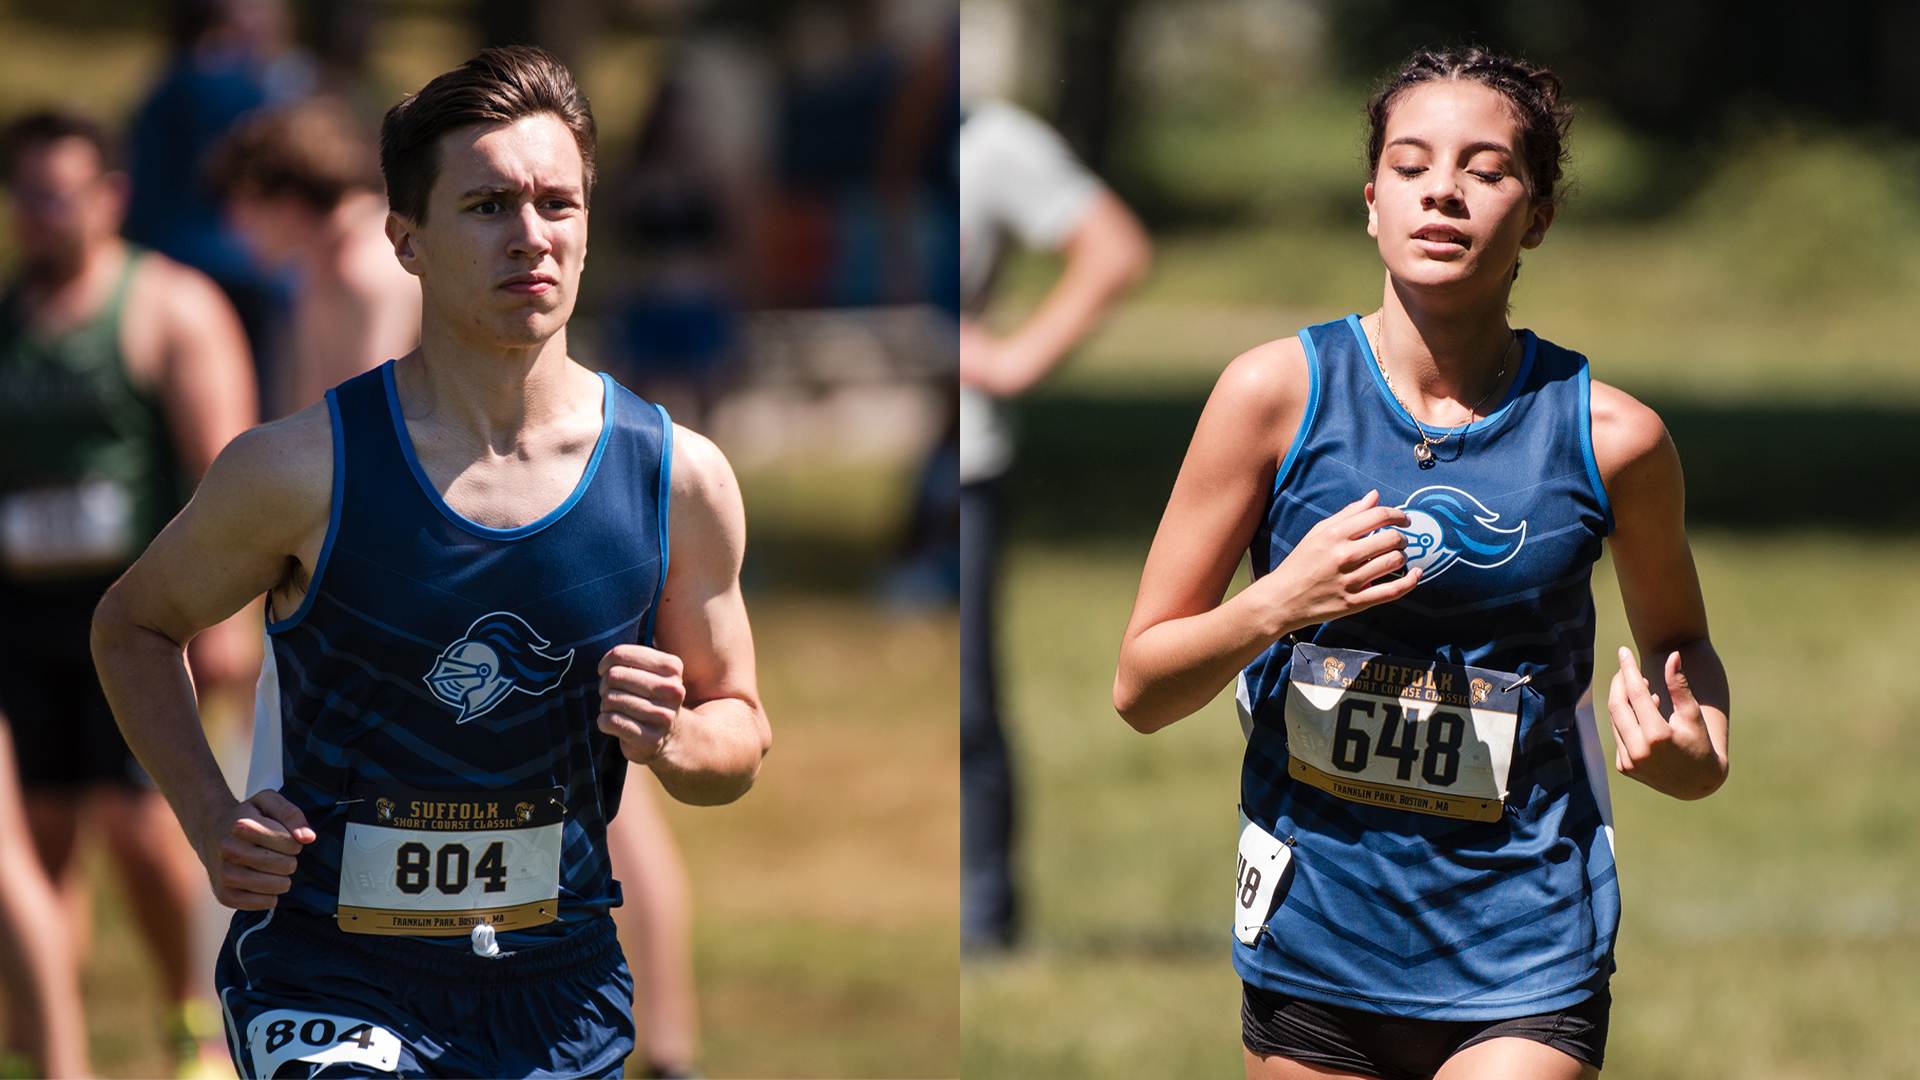 CHAMPIONSHIP PREVIEW: Men's and Women's Cross Country Prepare for the GNAC Championship on Saturday